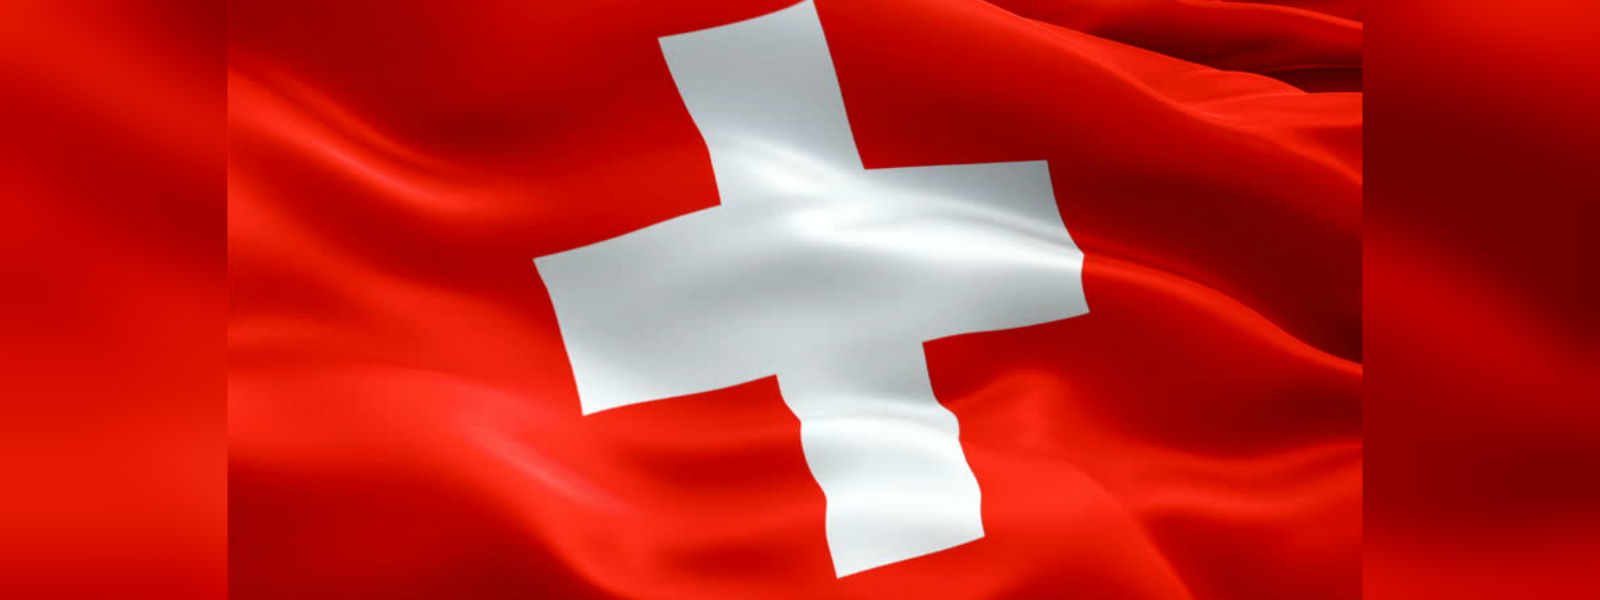 Embassy of Switzerland hopes for a swift return to a positive cooperation